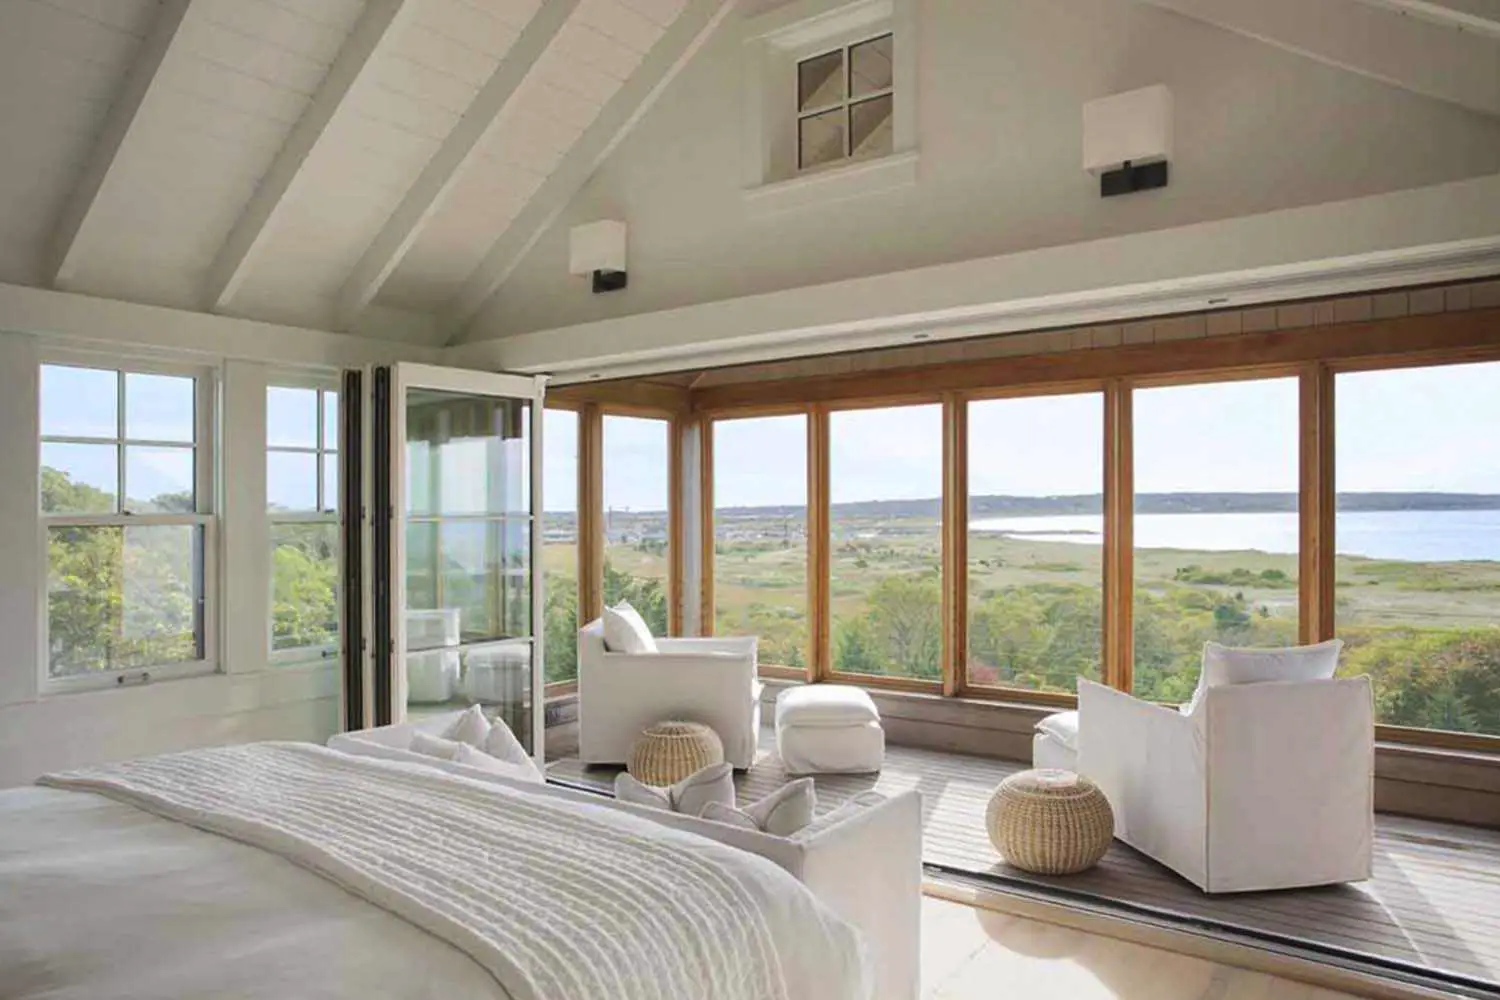 Bedroom with View, Beach Barn House in Massachusetts